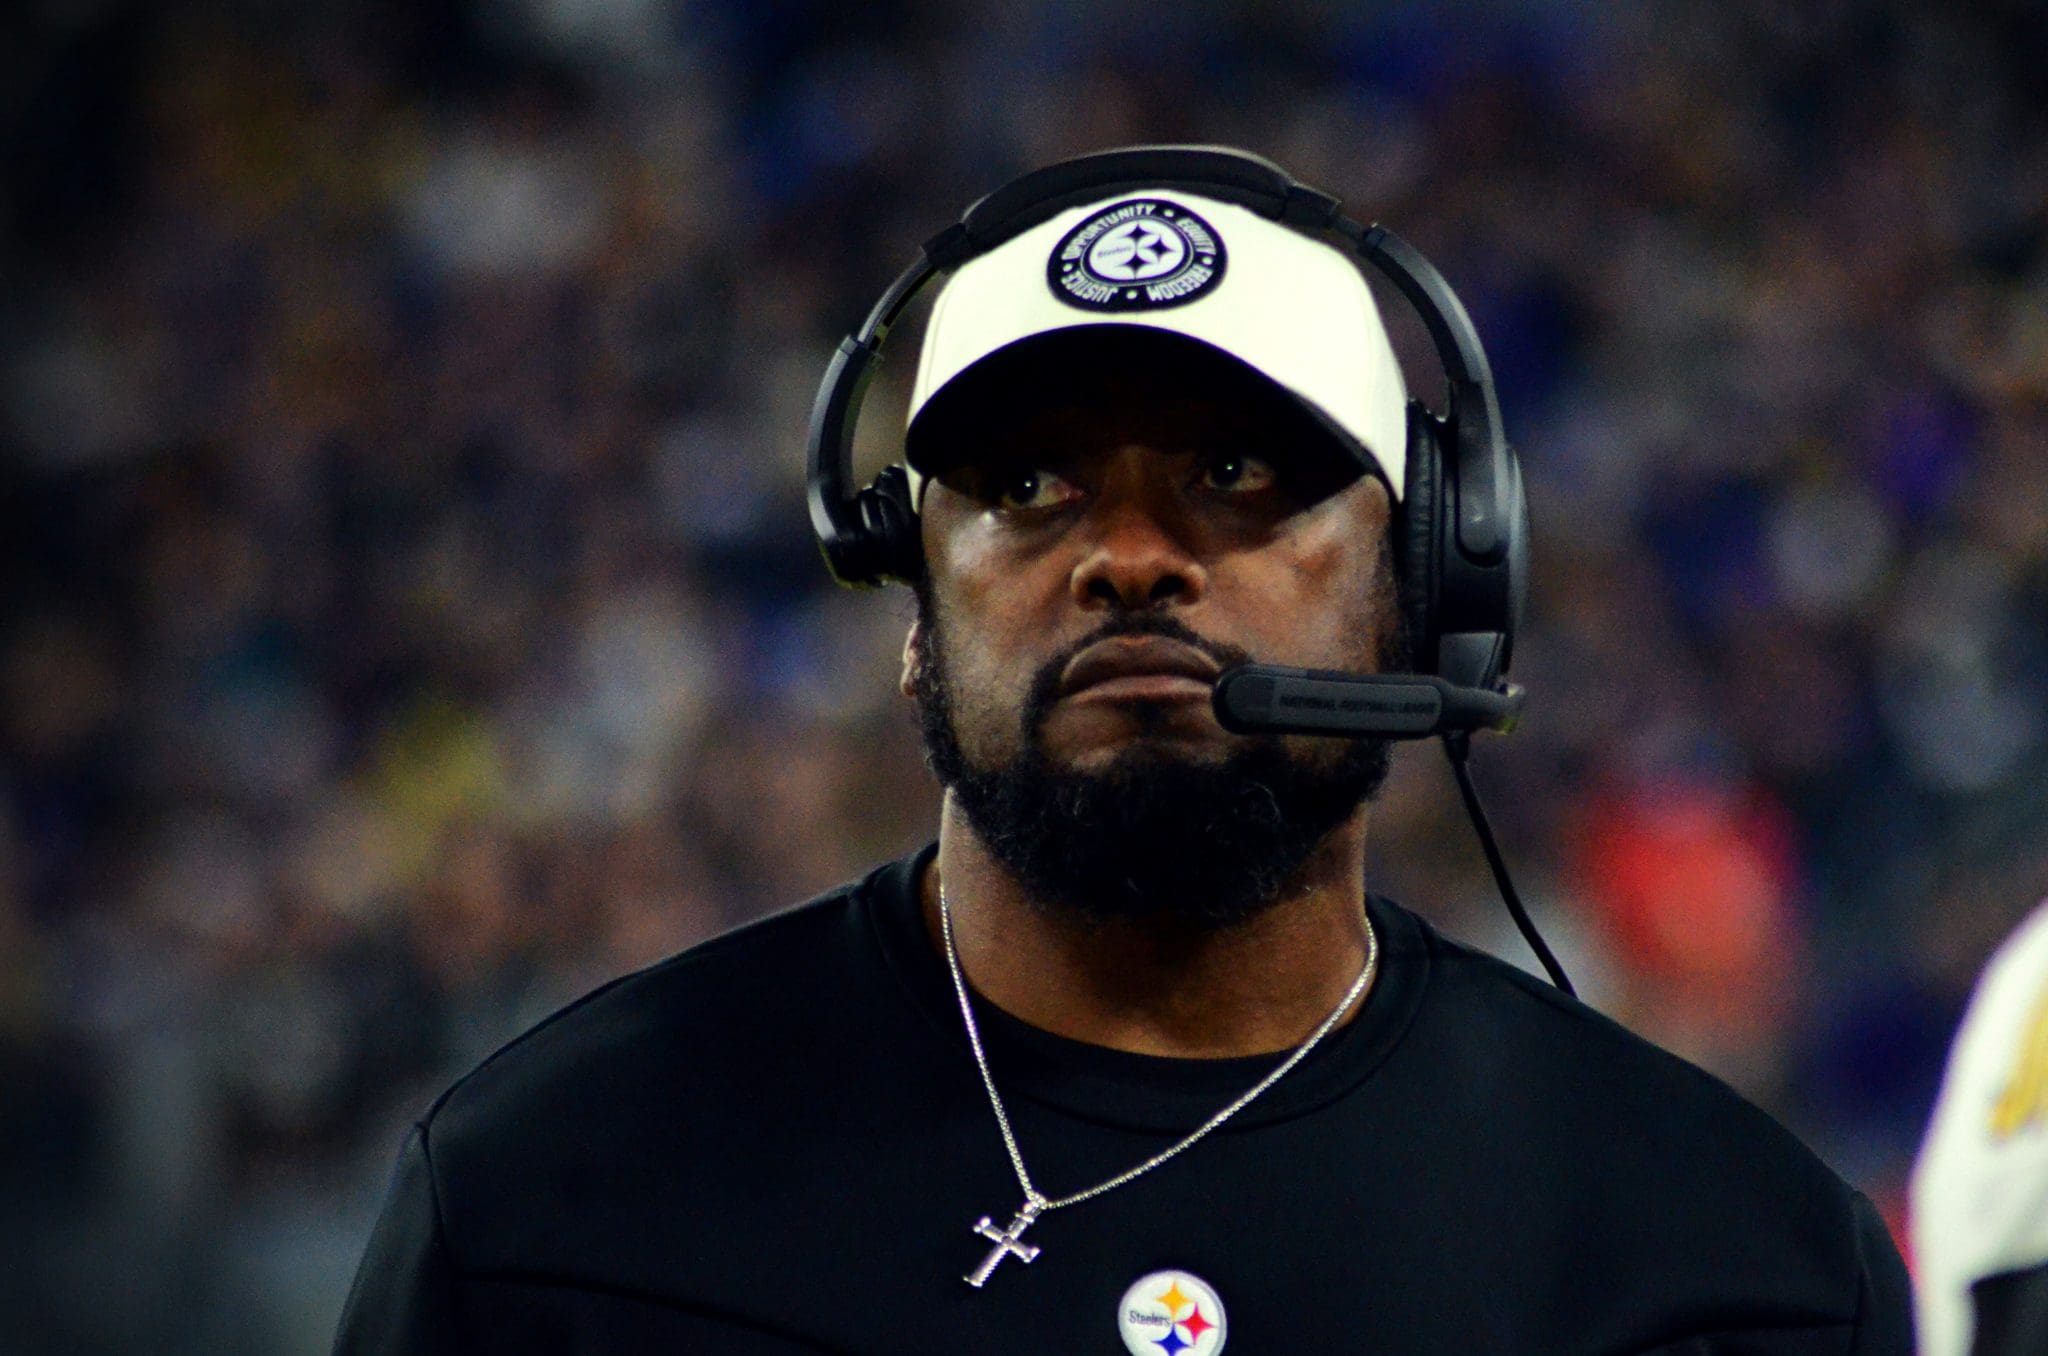 steelers playoff Mike Tomlin looks on as the Steelers face the Ravens on Jan. 1, 2022 in Baltimore. (Mitchell Northam / Steelers Now)